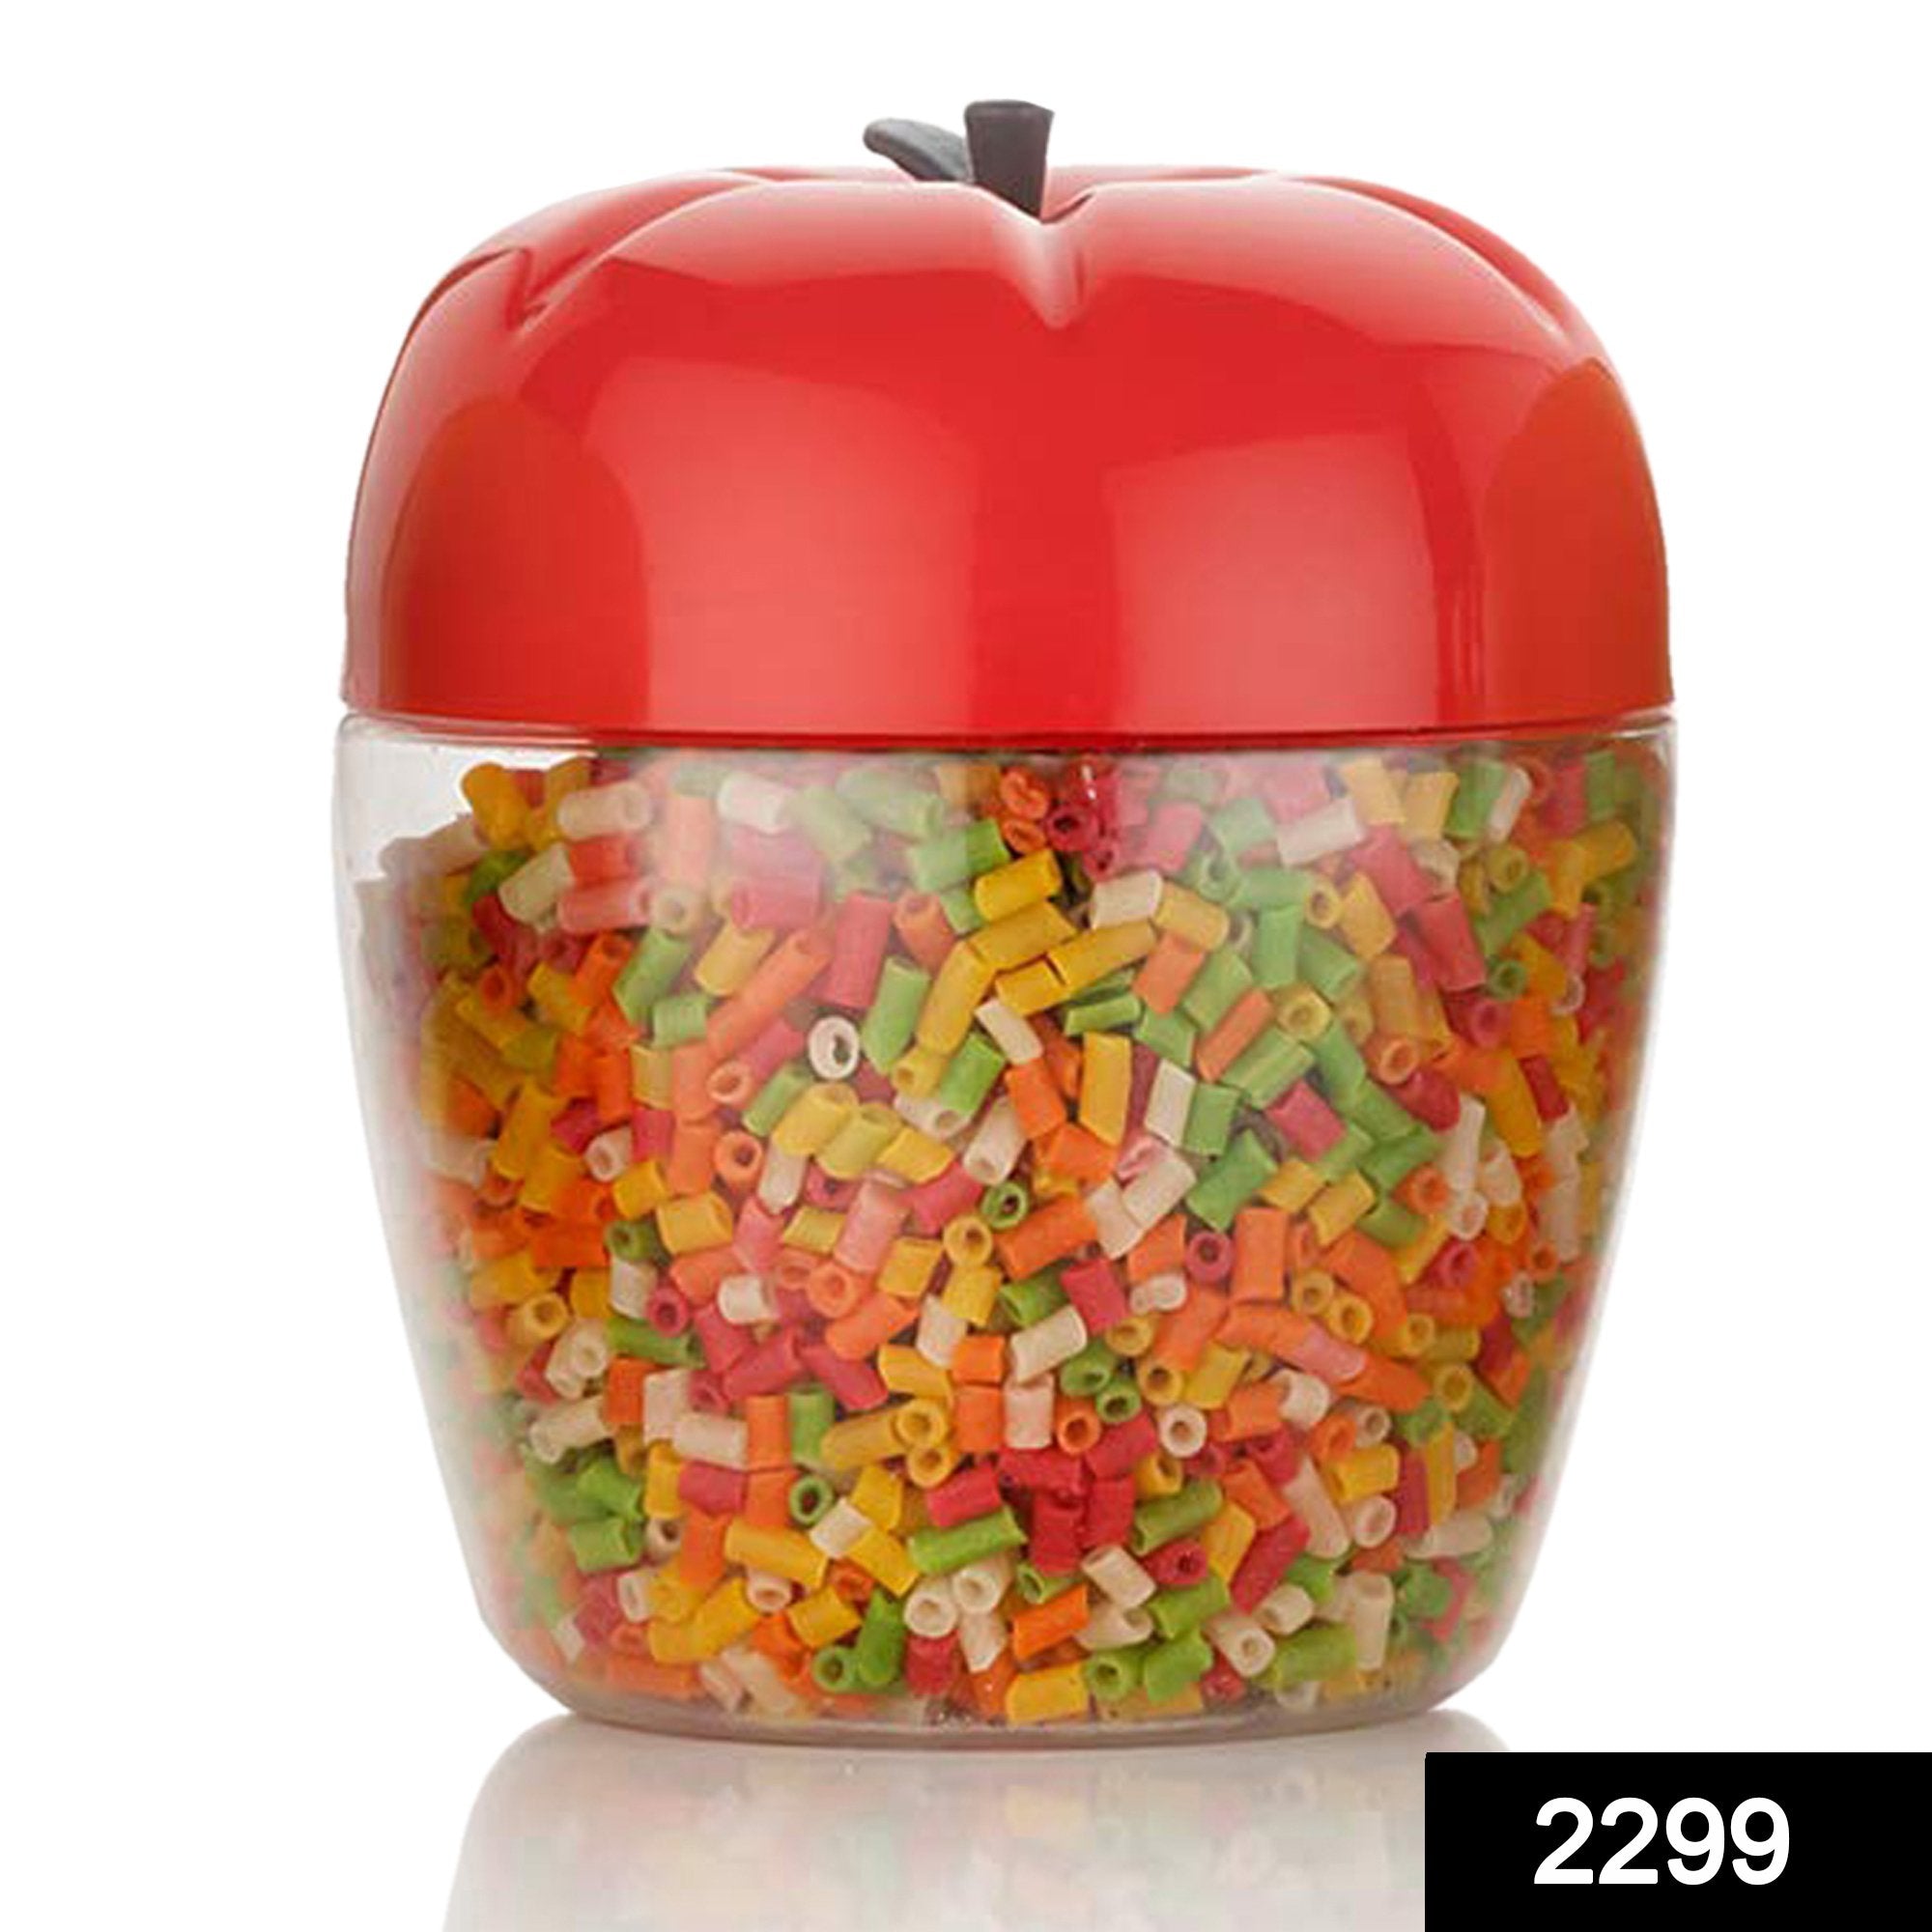 2299 Jar/Container with Apple Shape for Kitchen Storage (1500ML) - SkyShopy